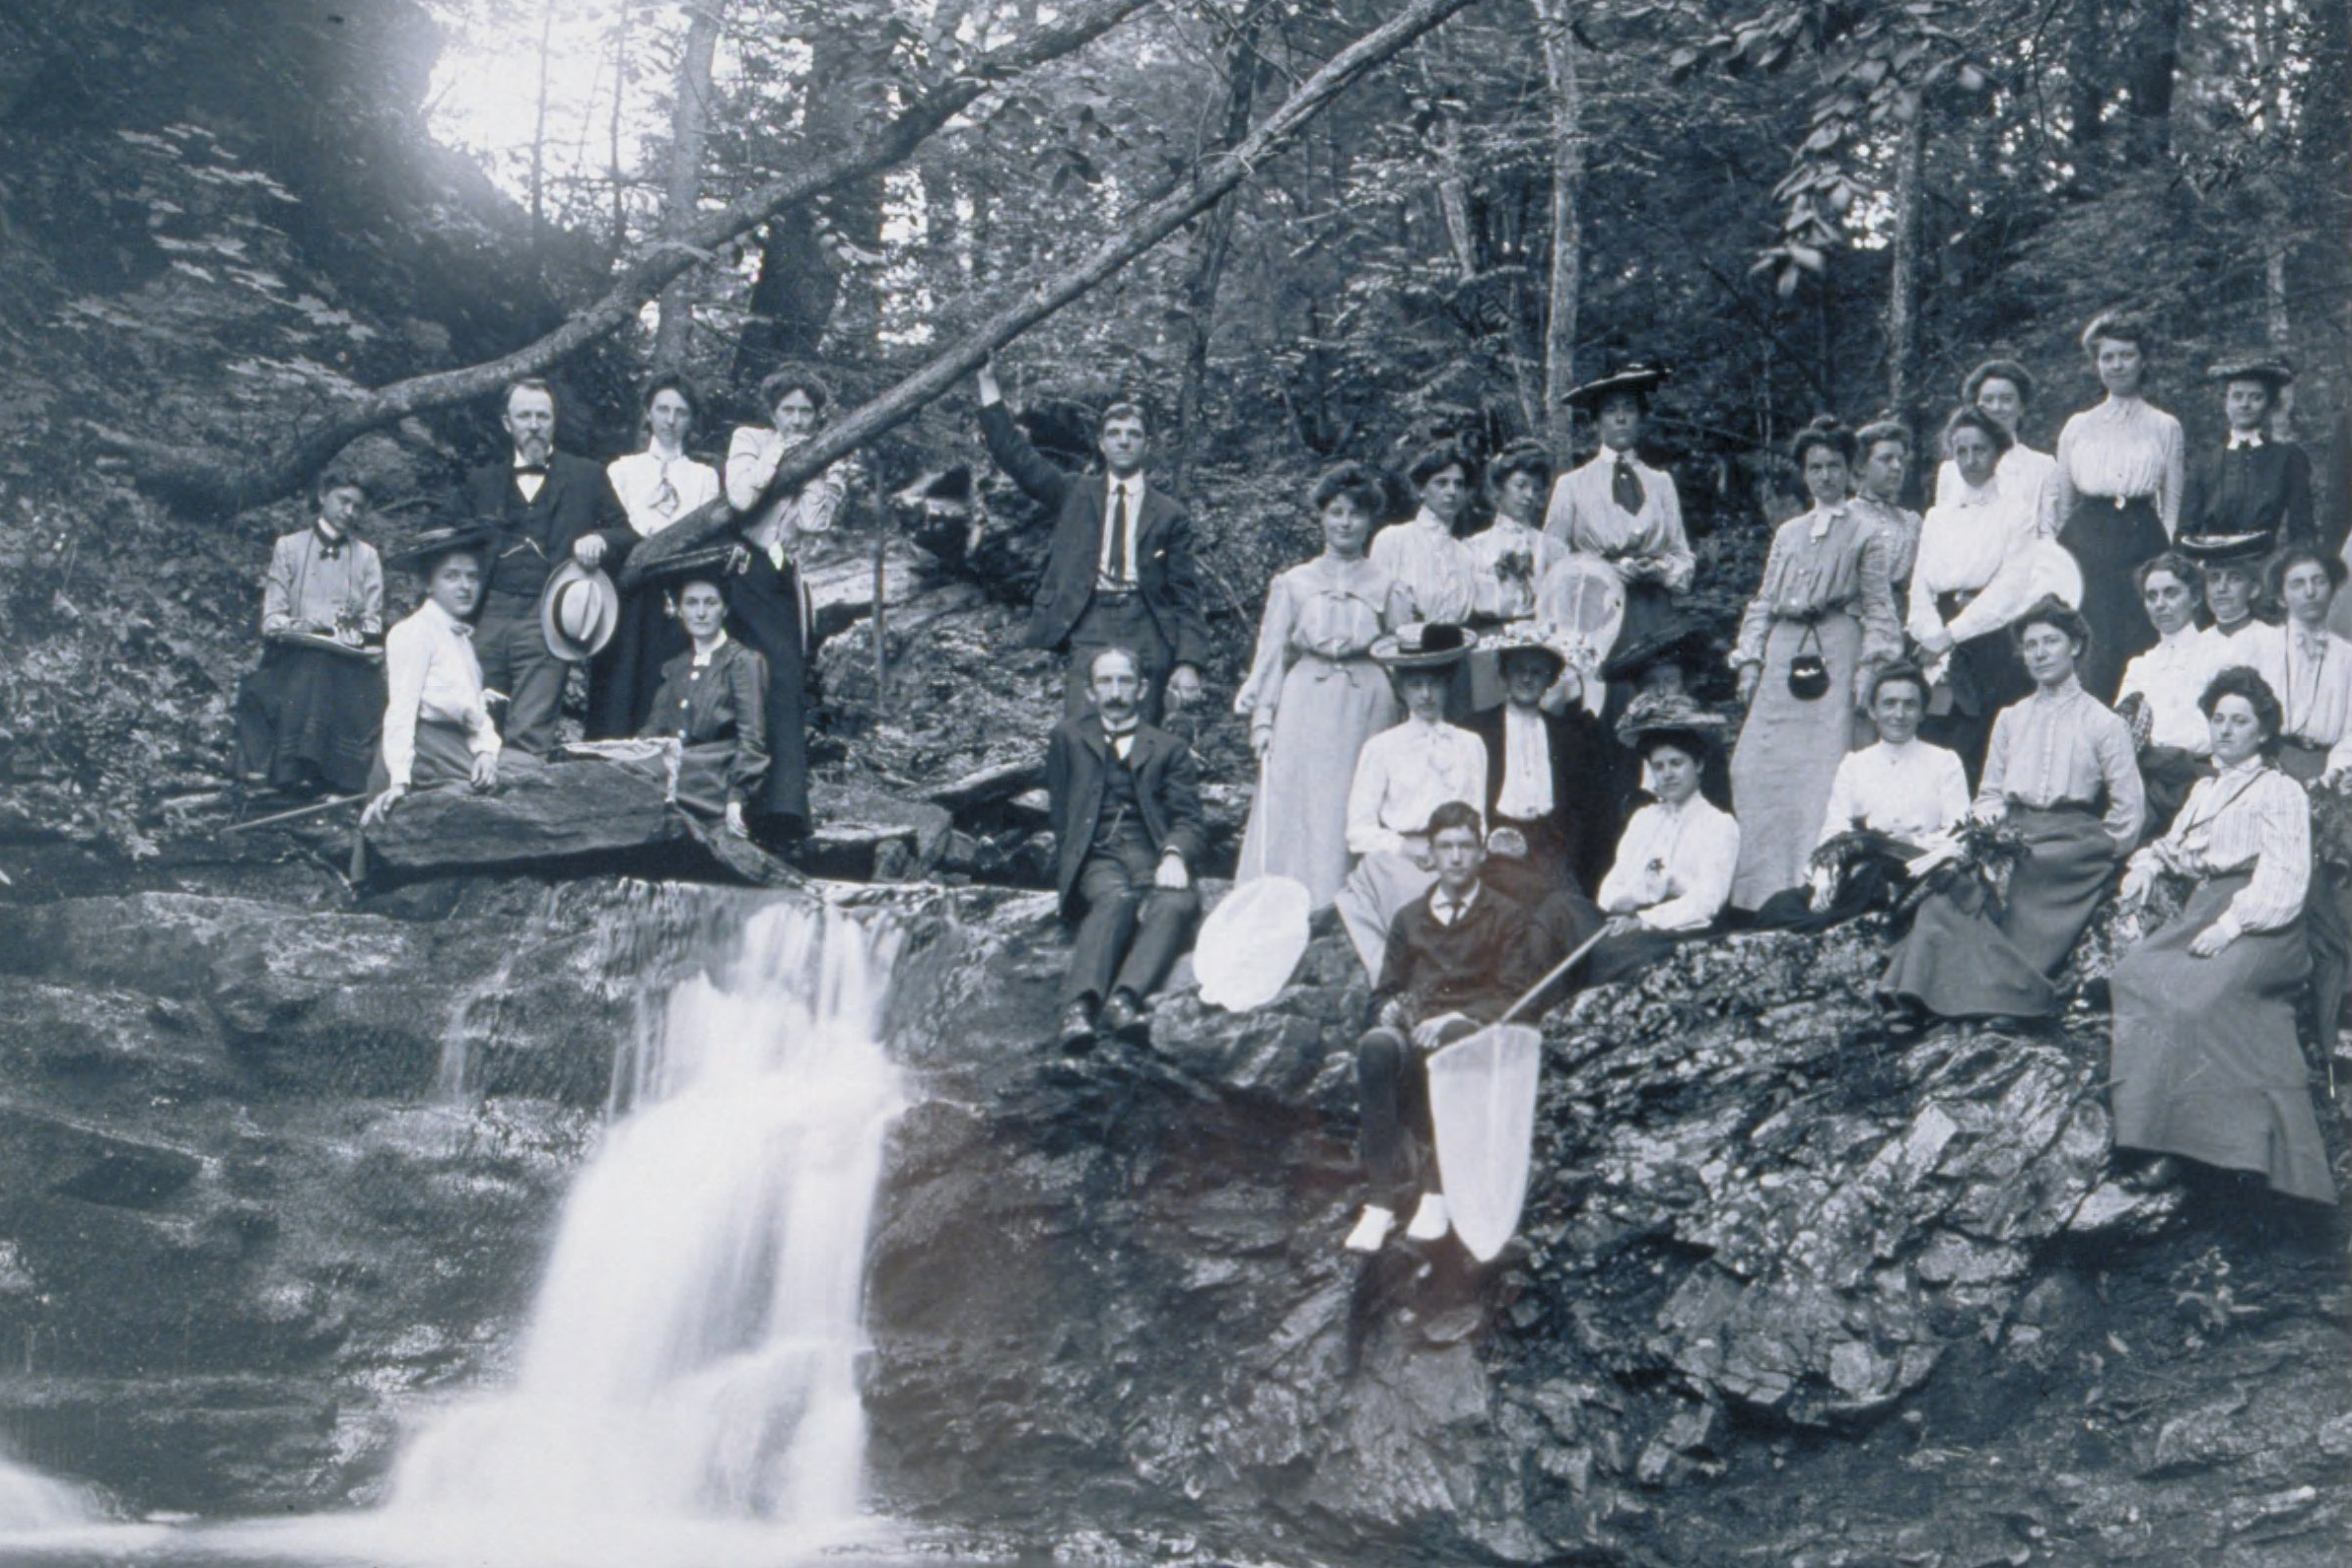 The Connecticut Agricultural College Summer School Picnic, 1907: Twenty-five women and four men sitting on rocks around a small waterfall in the woods off Codfish Falls Road in Mansfield. (University Photograph Collection, Archives & Special Collections, UConn Libraries)